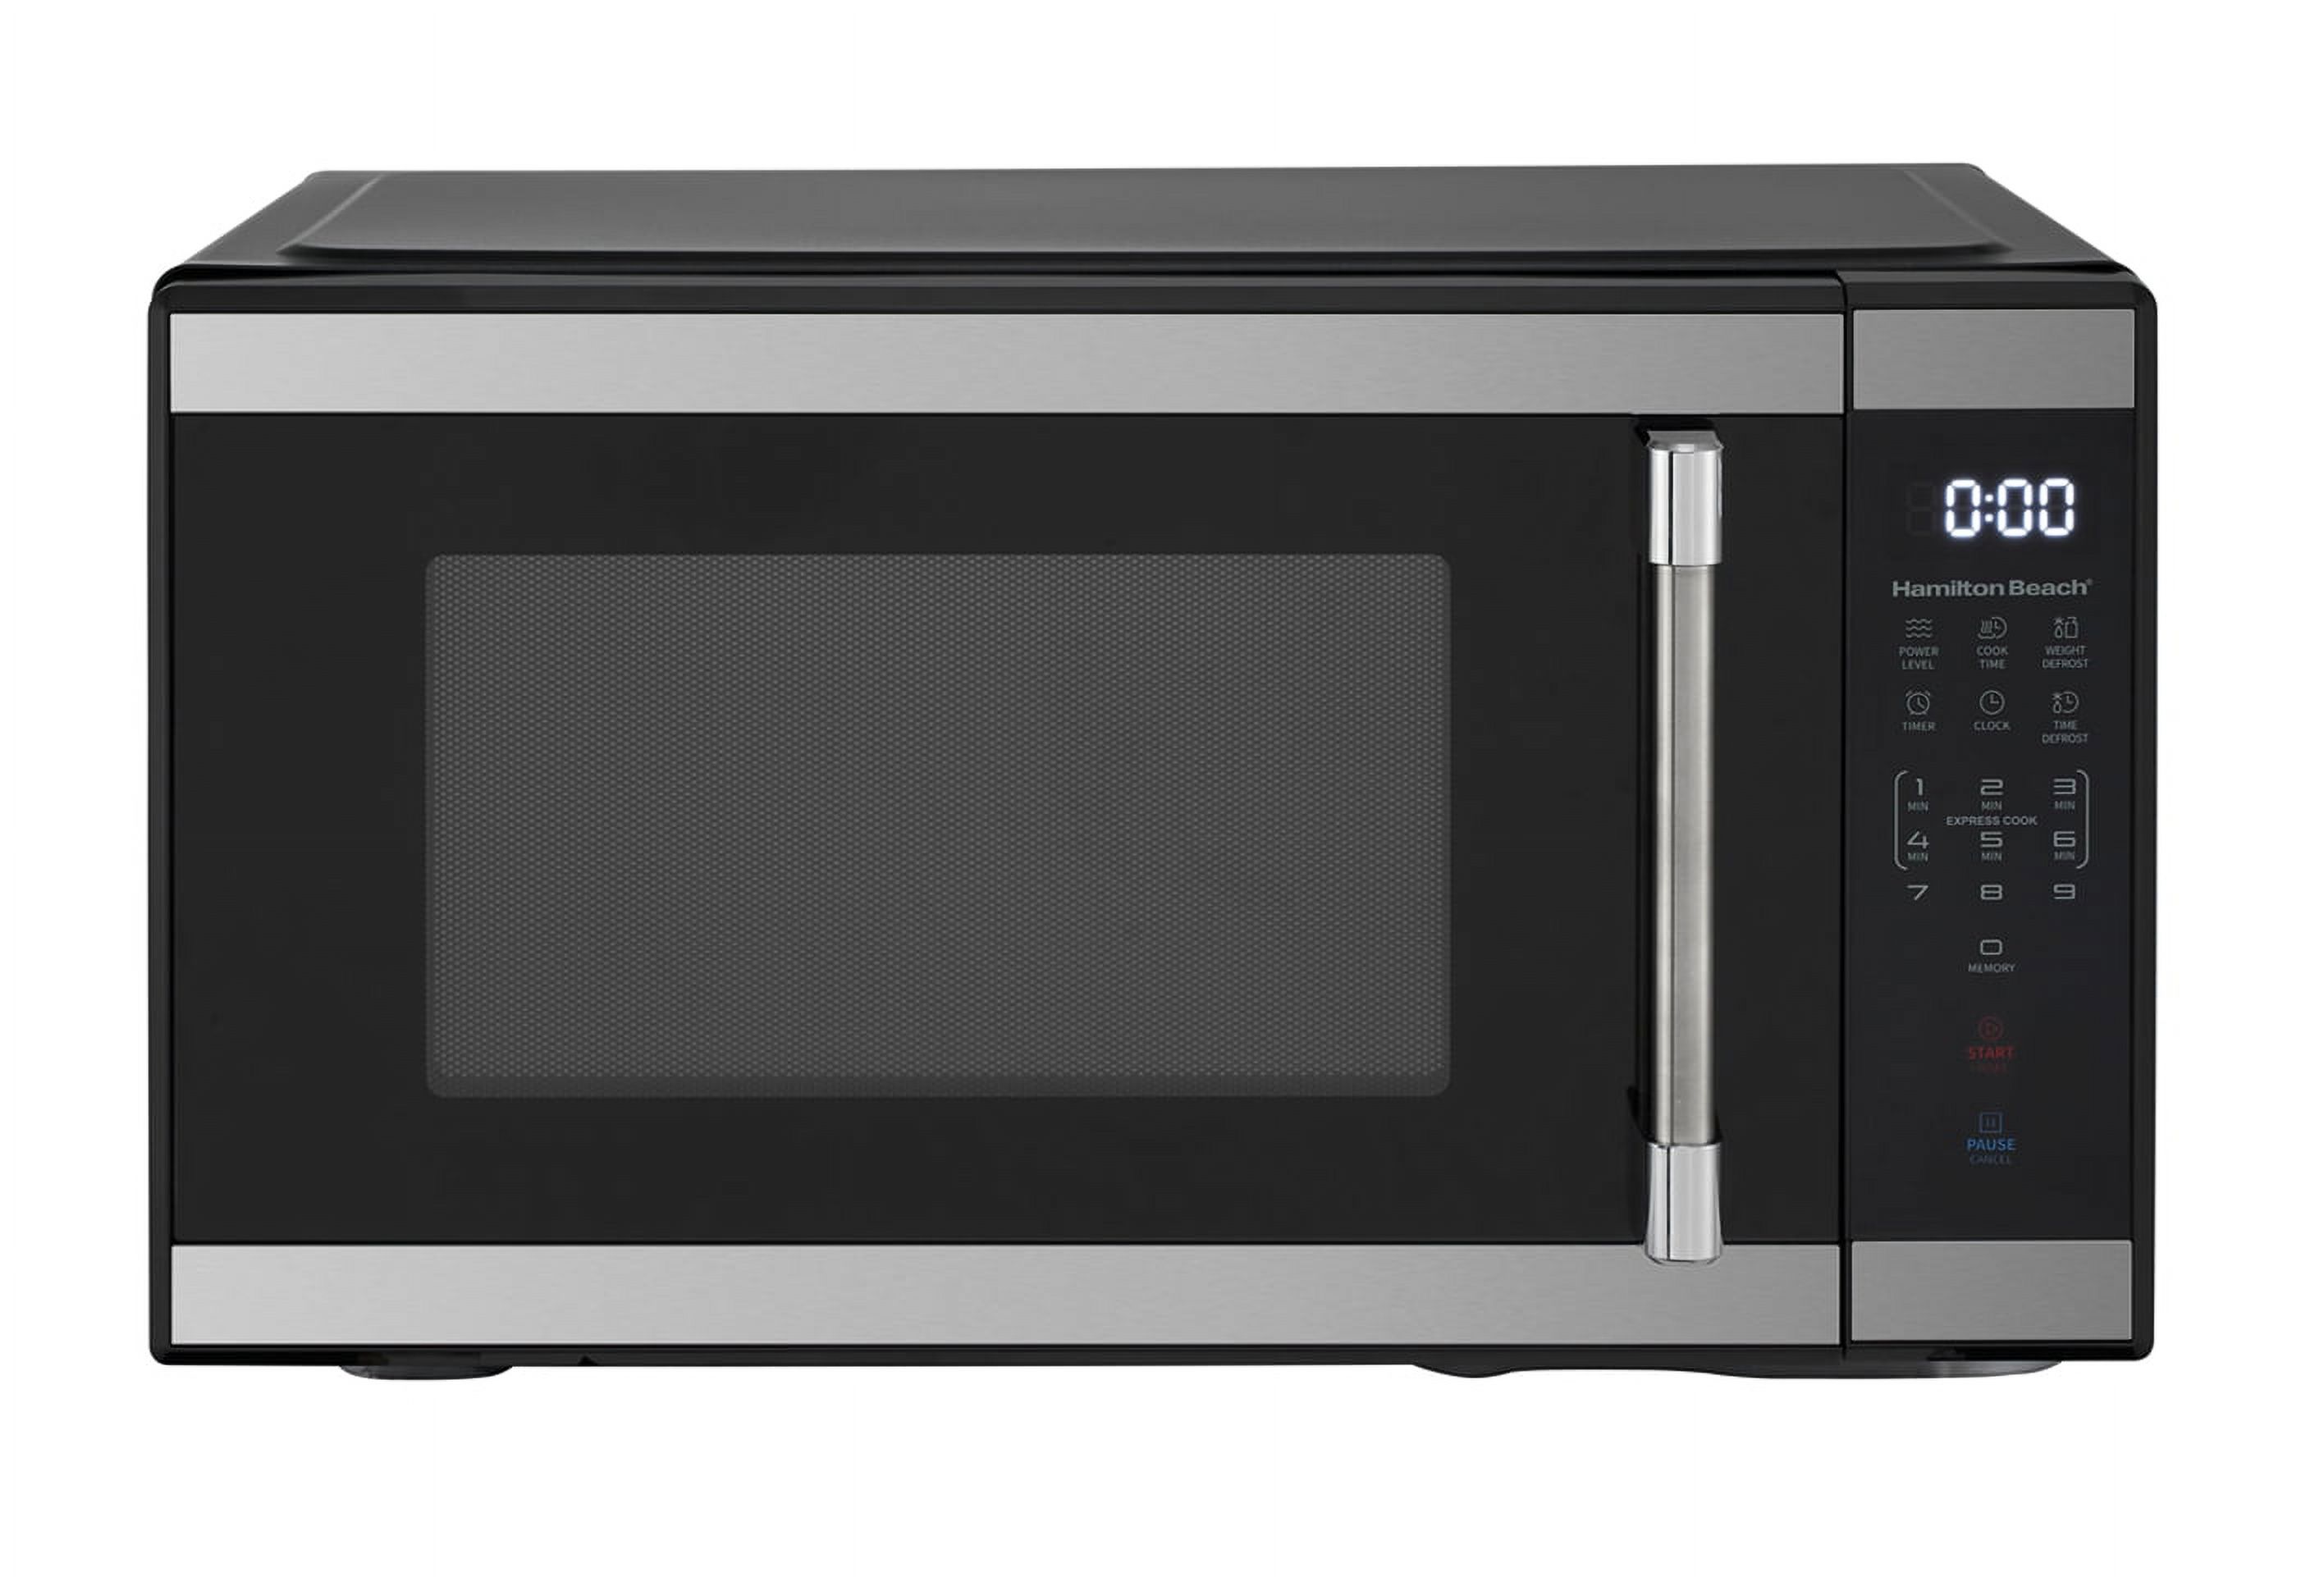 Hamilton Beach 1.1 cu ft Countertop Microwave Oven in Stainless Steel - image 1 of 8